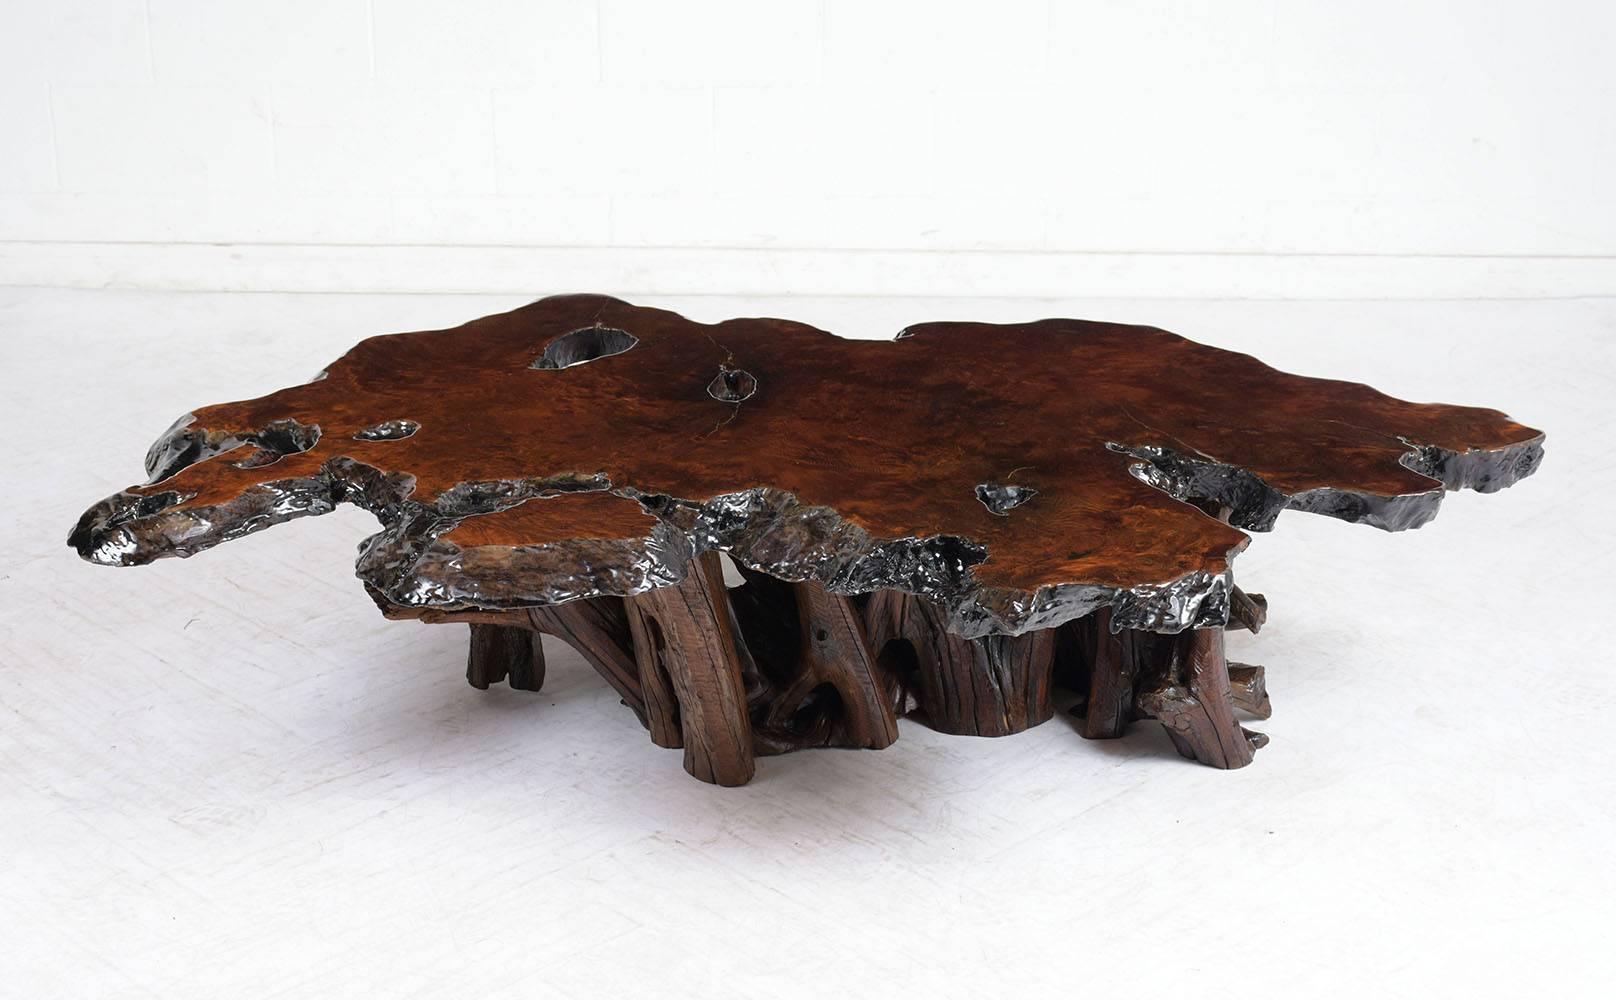 This 1960s coffee table has a unique shaped root base and live edge surface. The burl wood coffee table is finished in a rich, deep walnut color stain with a lacquered finish. This coffee table is sturdy, eye-catching, and ready to be used in any